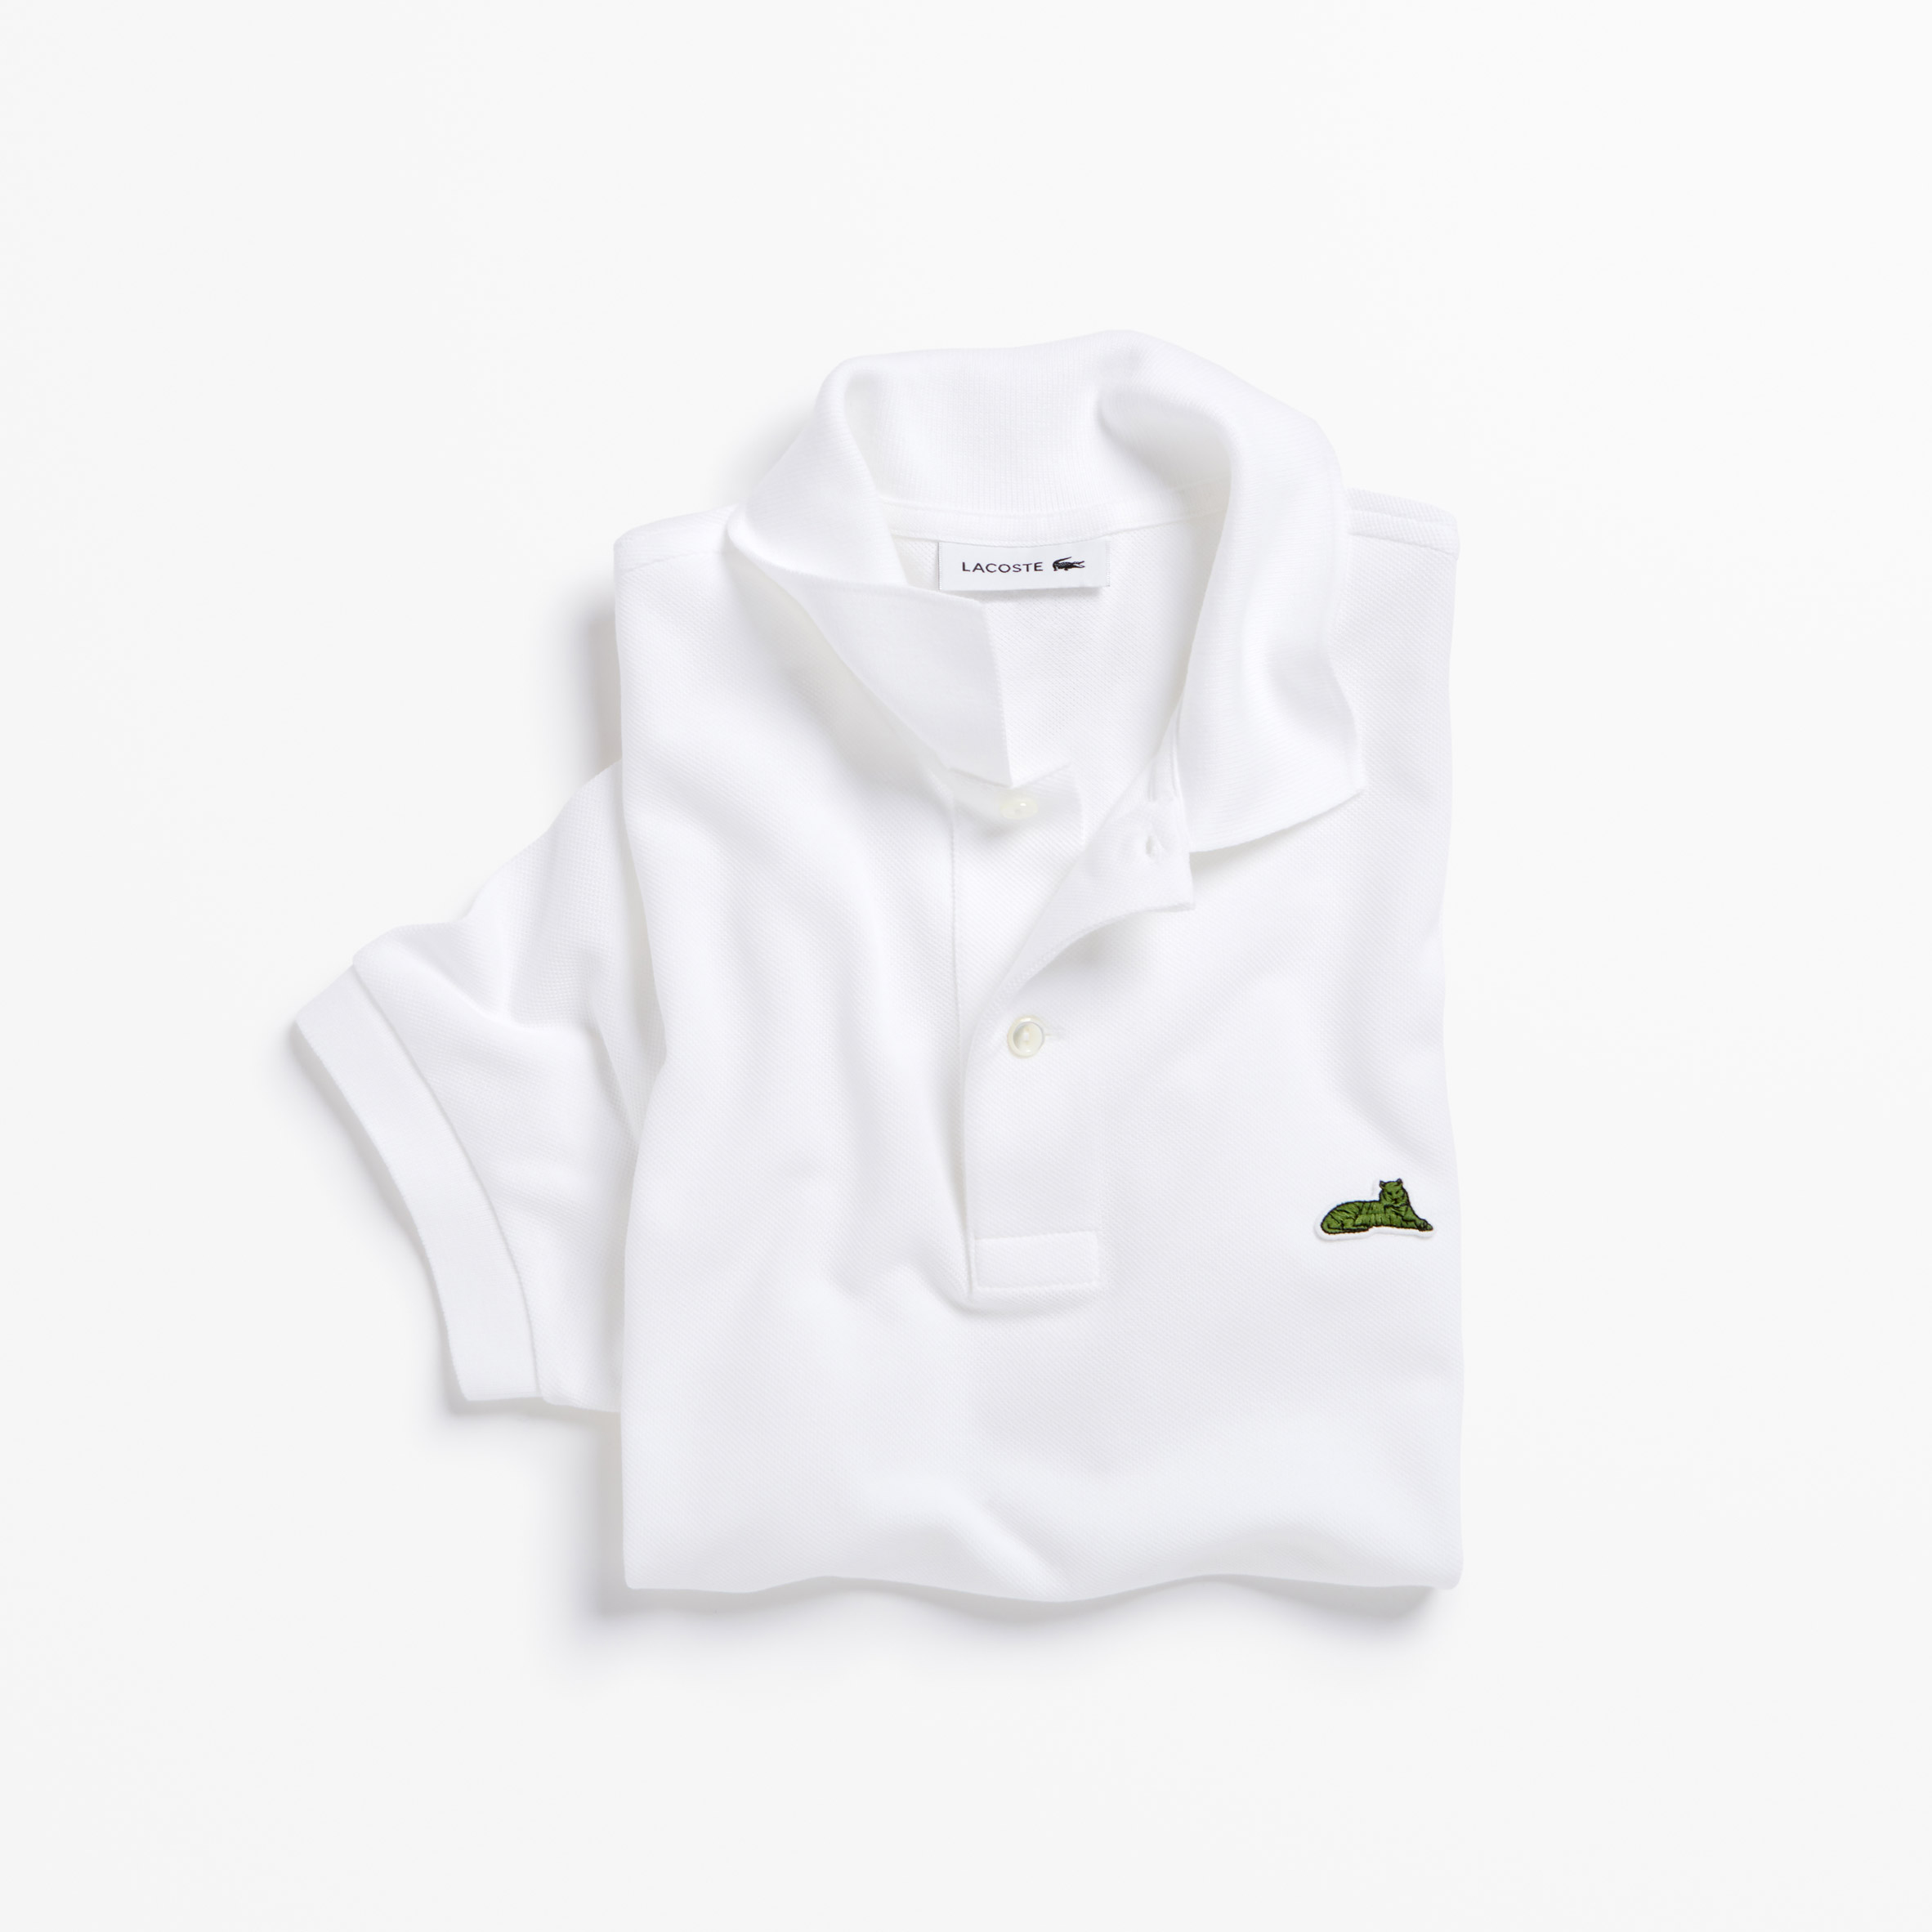 Lacoste crocodile logo replaced by 